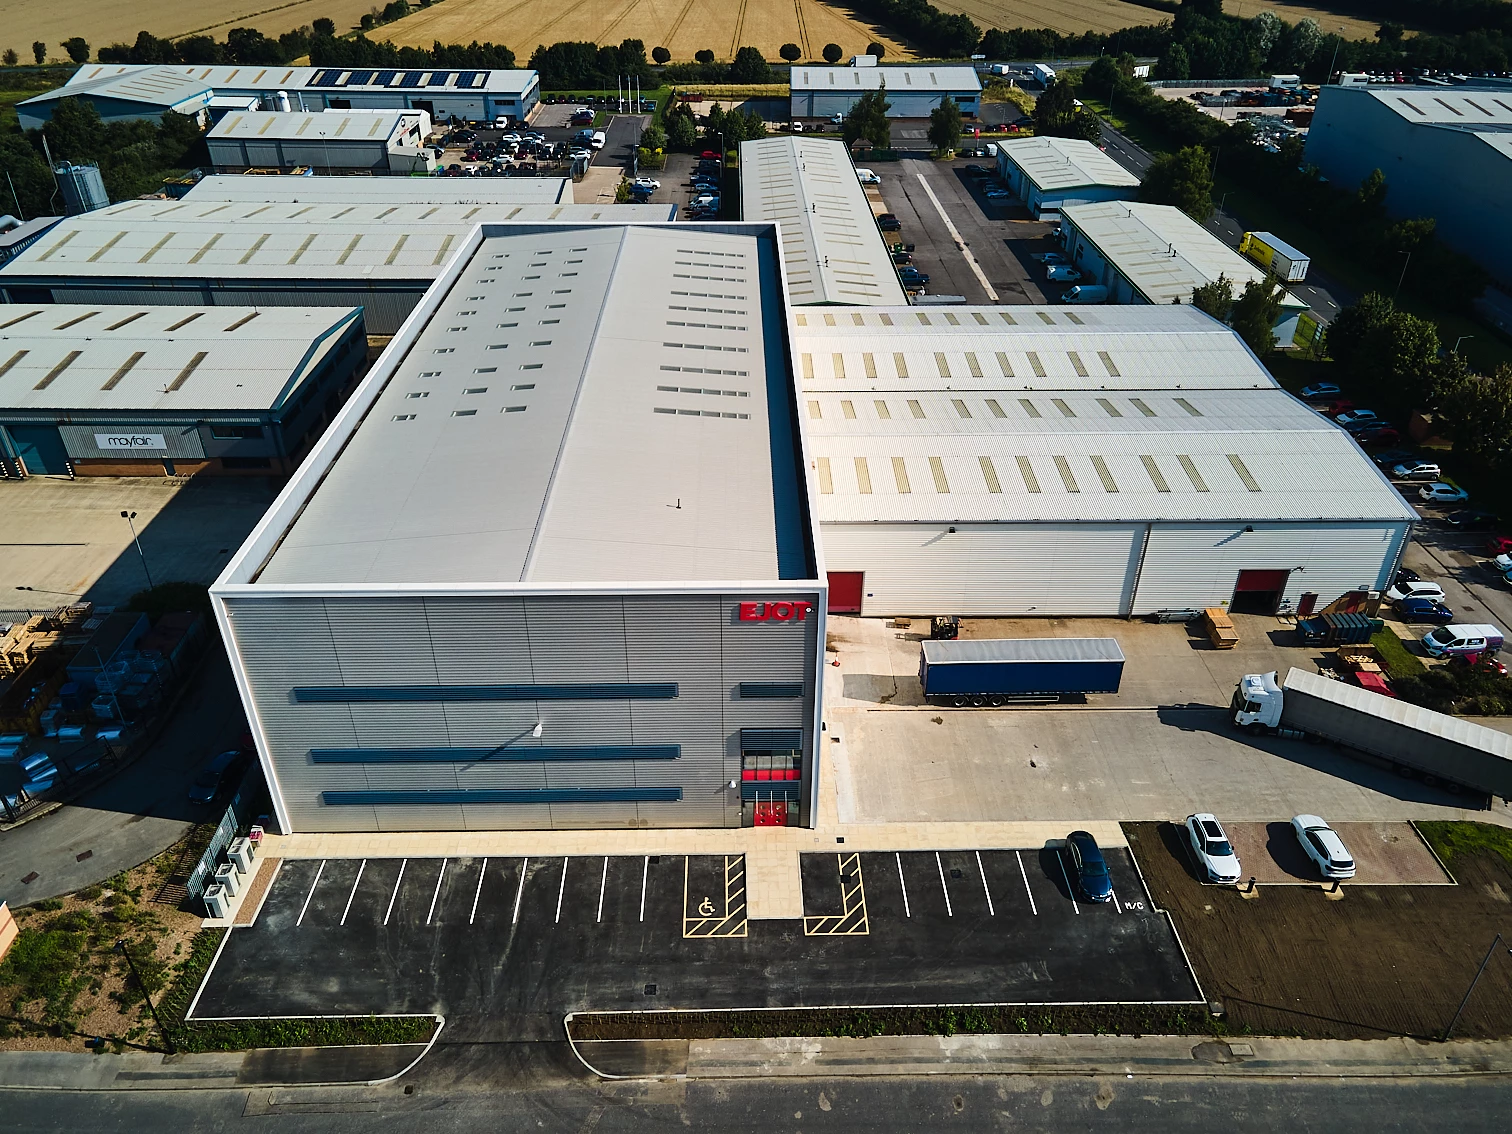 The building extension has more than doubled the size of EJOT's existing UK centre at Sherburn-in-Elmet.